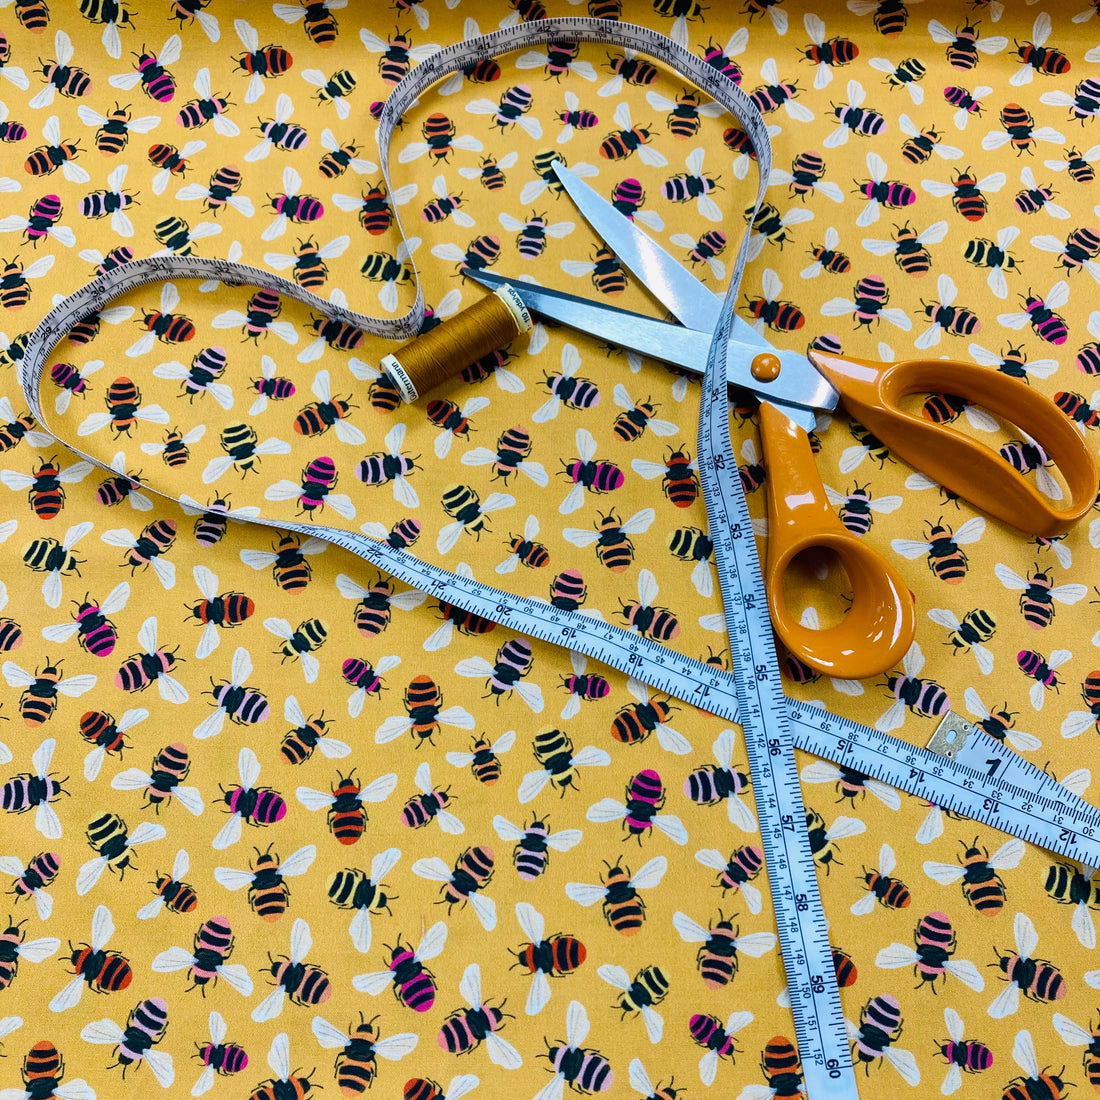 Bee themed fabric with scissors, a tape measure and thread.